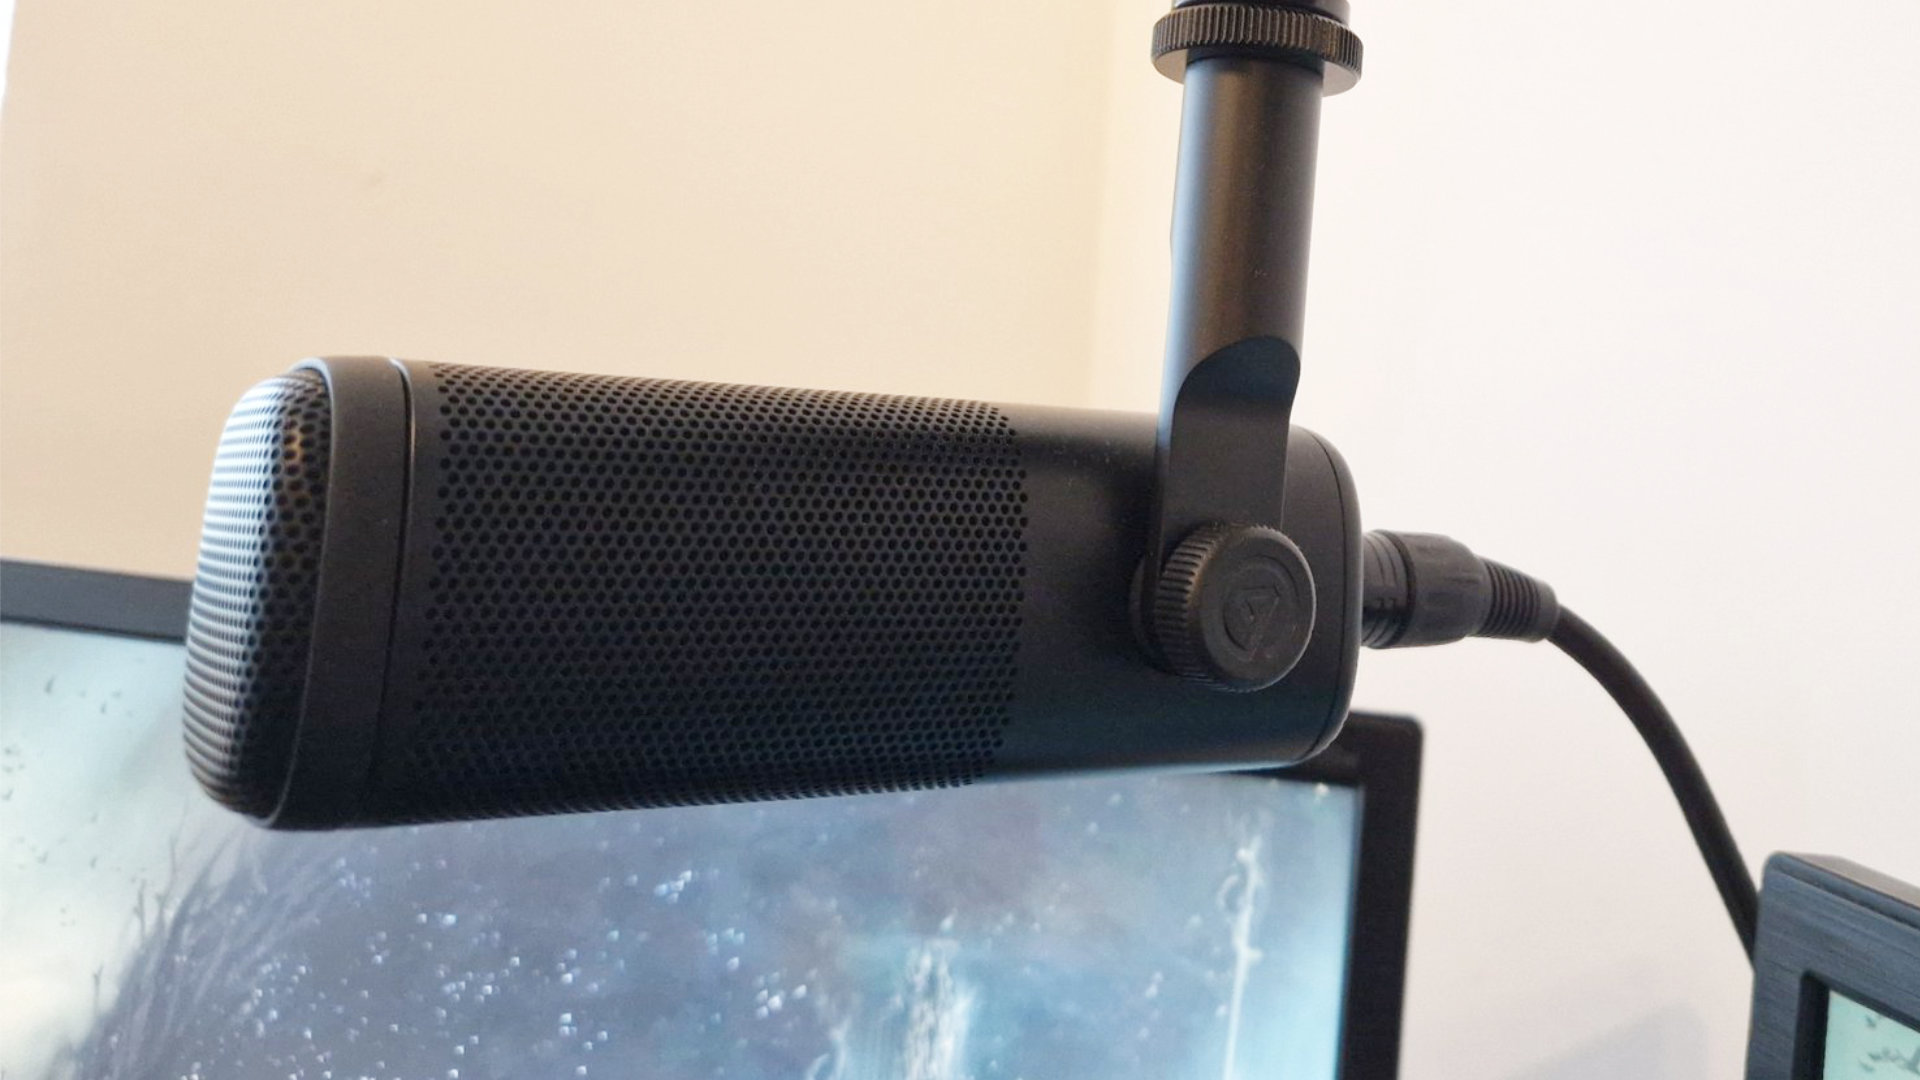 The Wave DX is the mic you NEED for streaming, The wait is over, Elgato  FINALLY has an XLR mic, and it sounds clean Presented by Elgato #ad